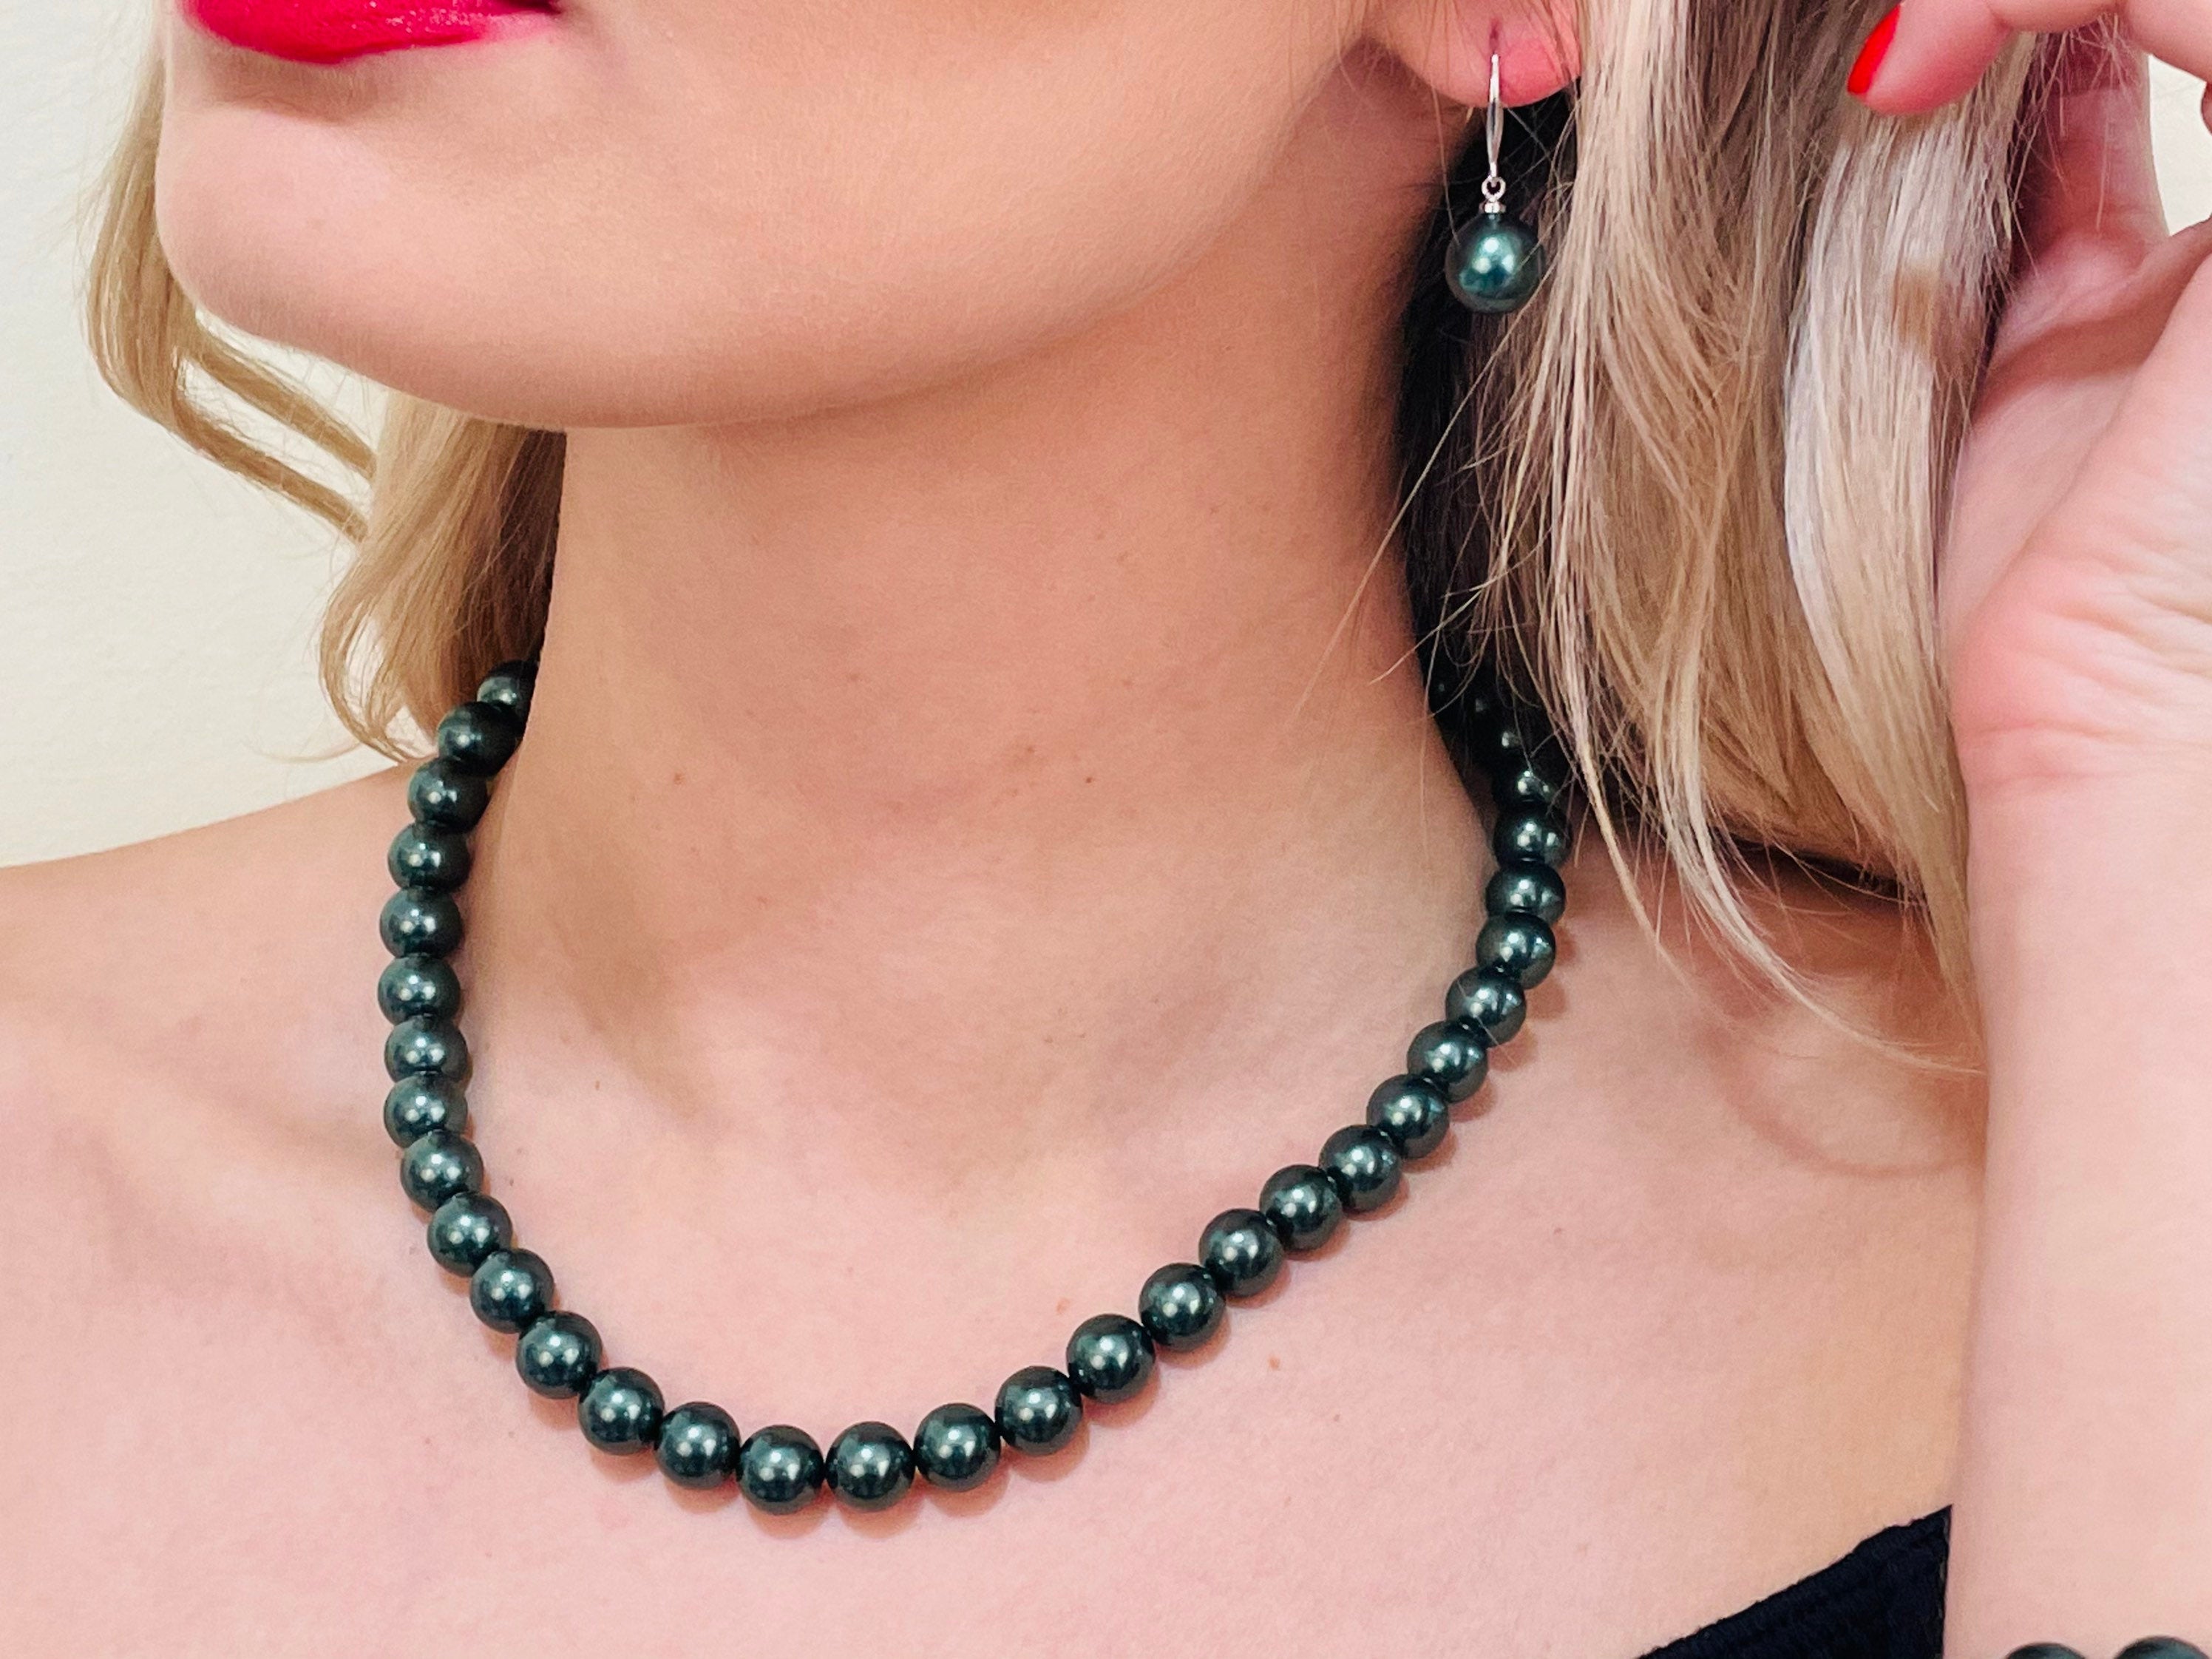 South Sea Shell Pearl Necklace - Dark Green